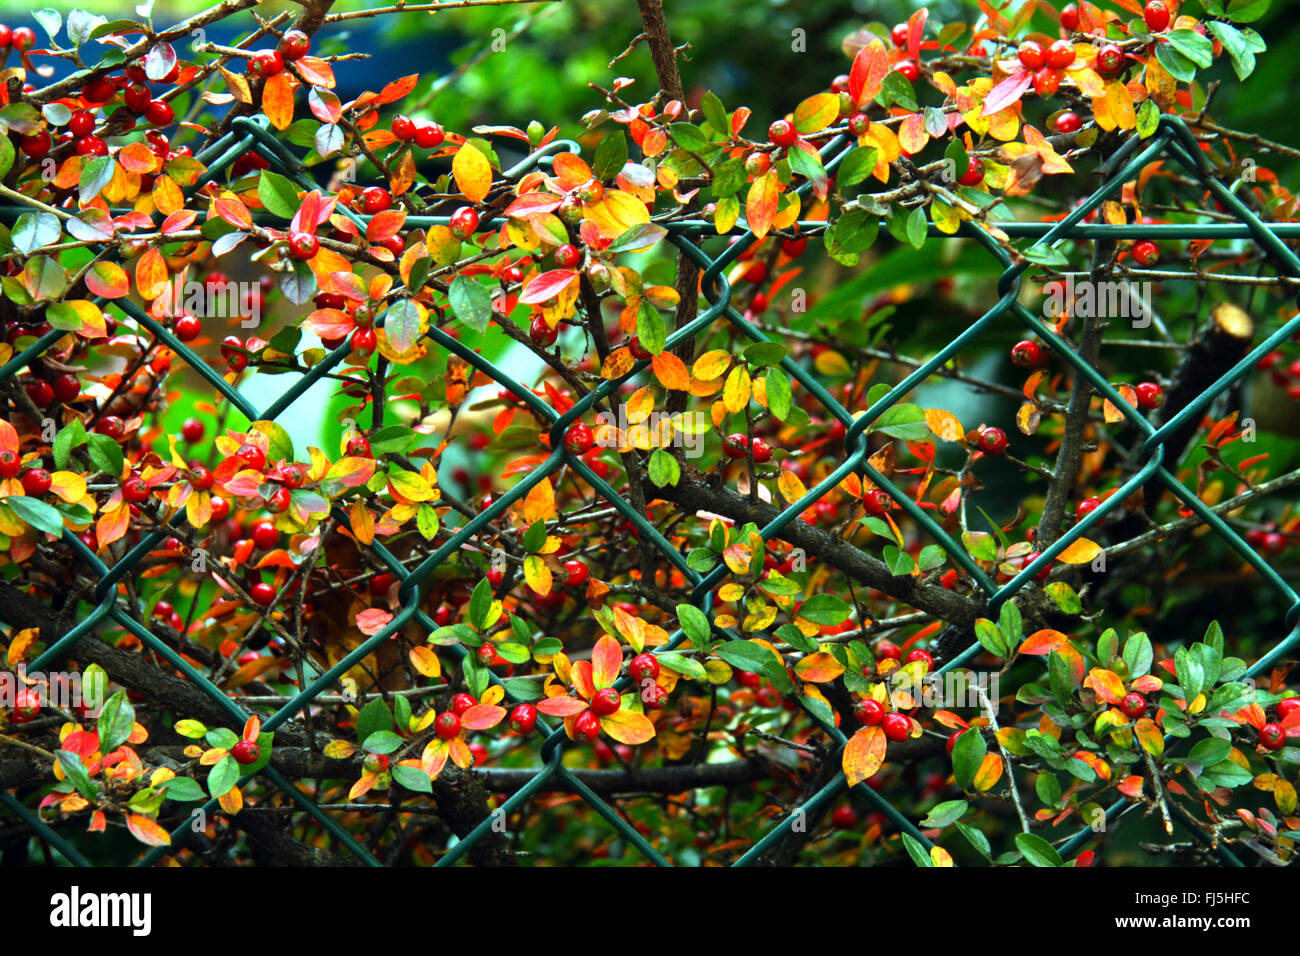 cotoneaster (Cotoneaster spec.), fruiting at a mesh wire fence, Germany Stock Photo